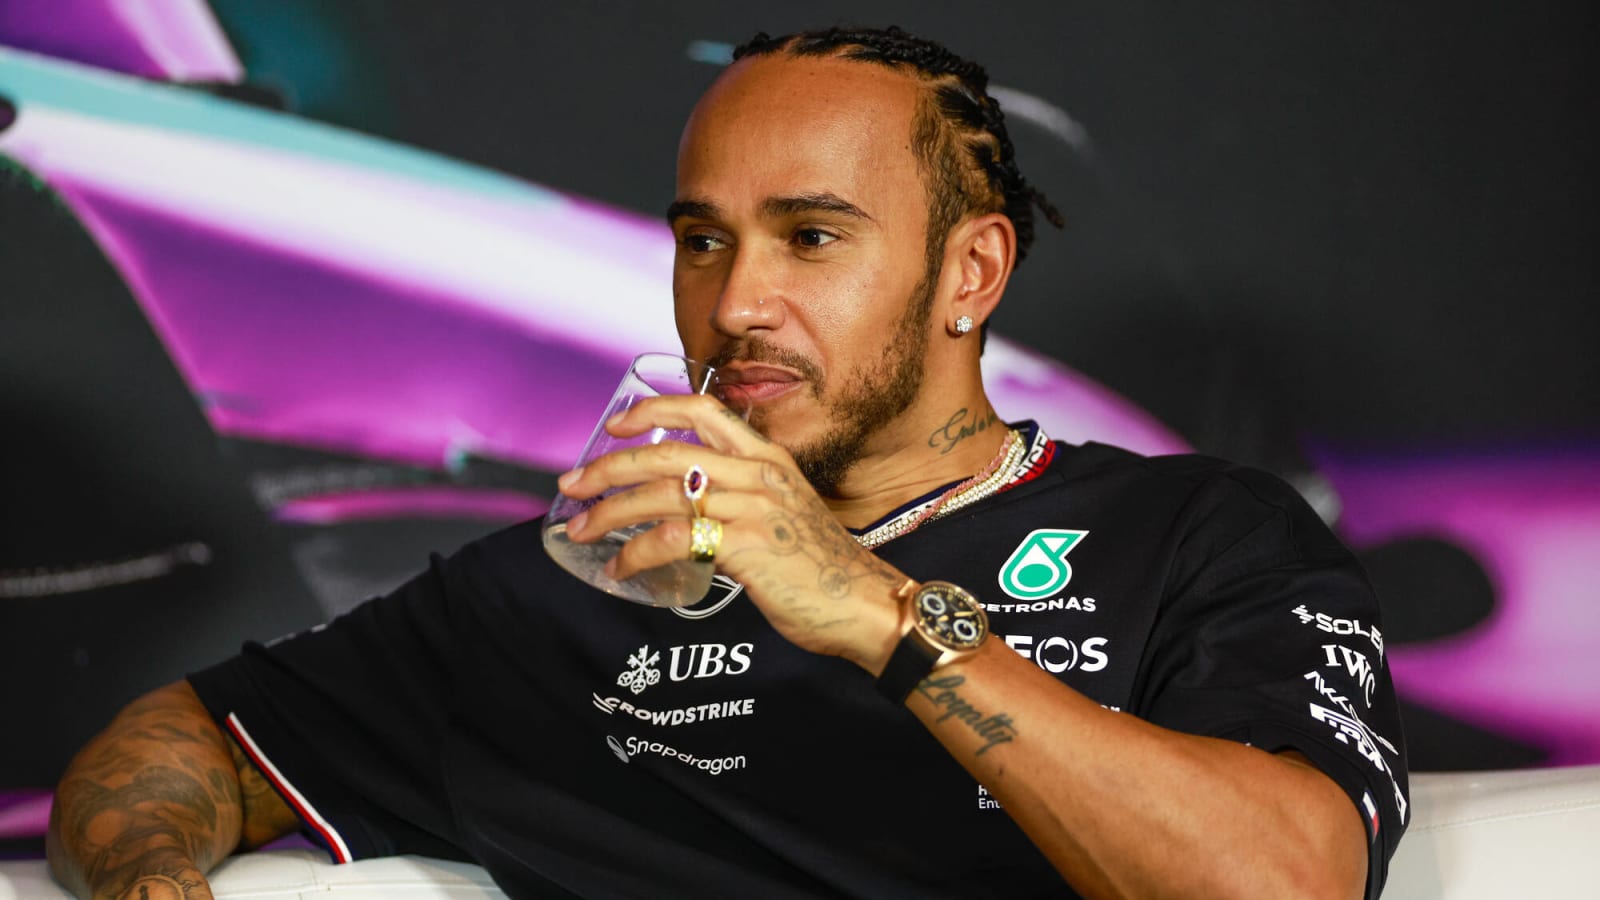 Lewis Hamilton deems Adrian Newey ‘at the top’ of the list of people he wants to work with in F1